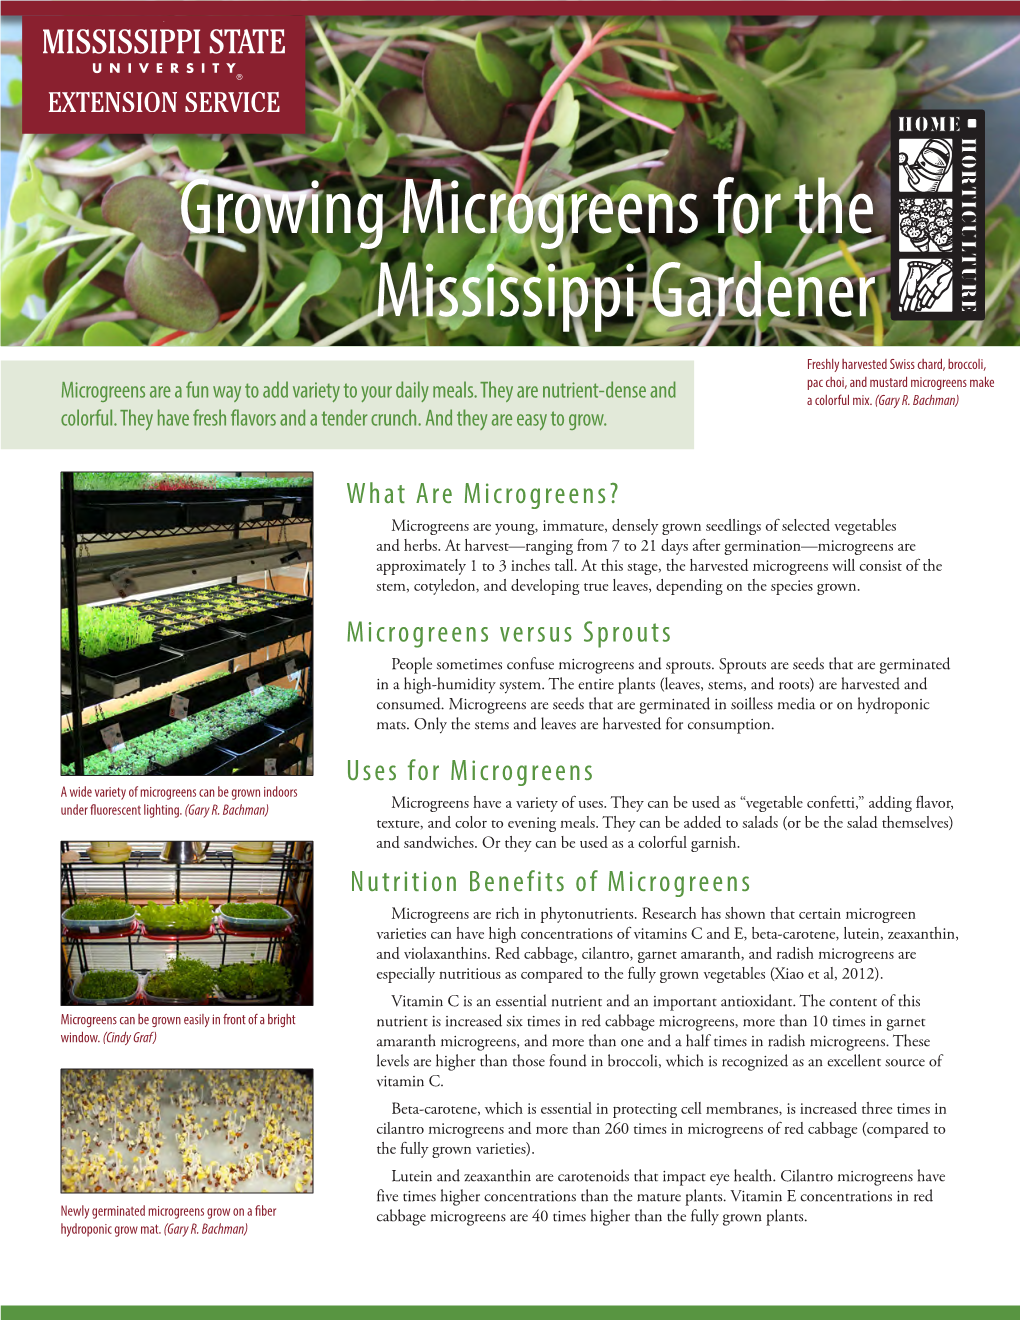 Growing Microgreens for the Mississippi Gardener